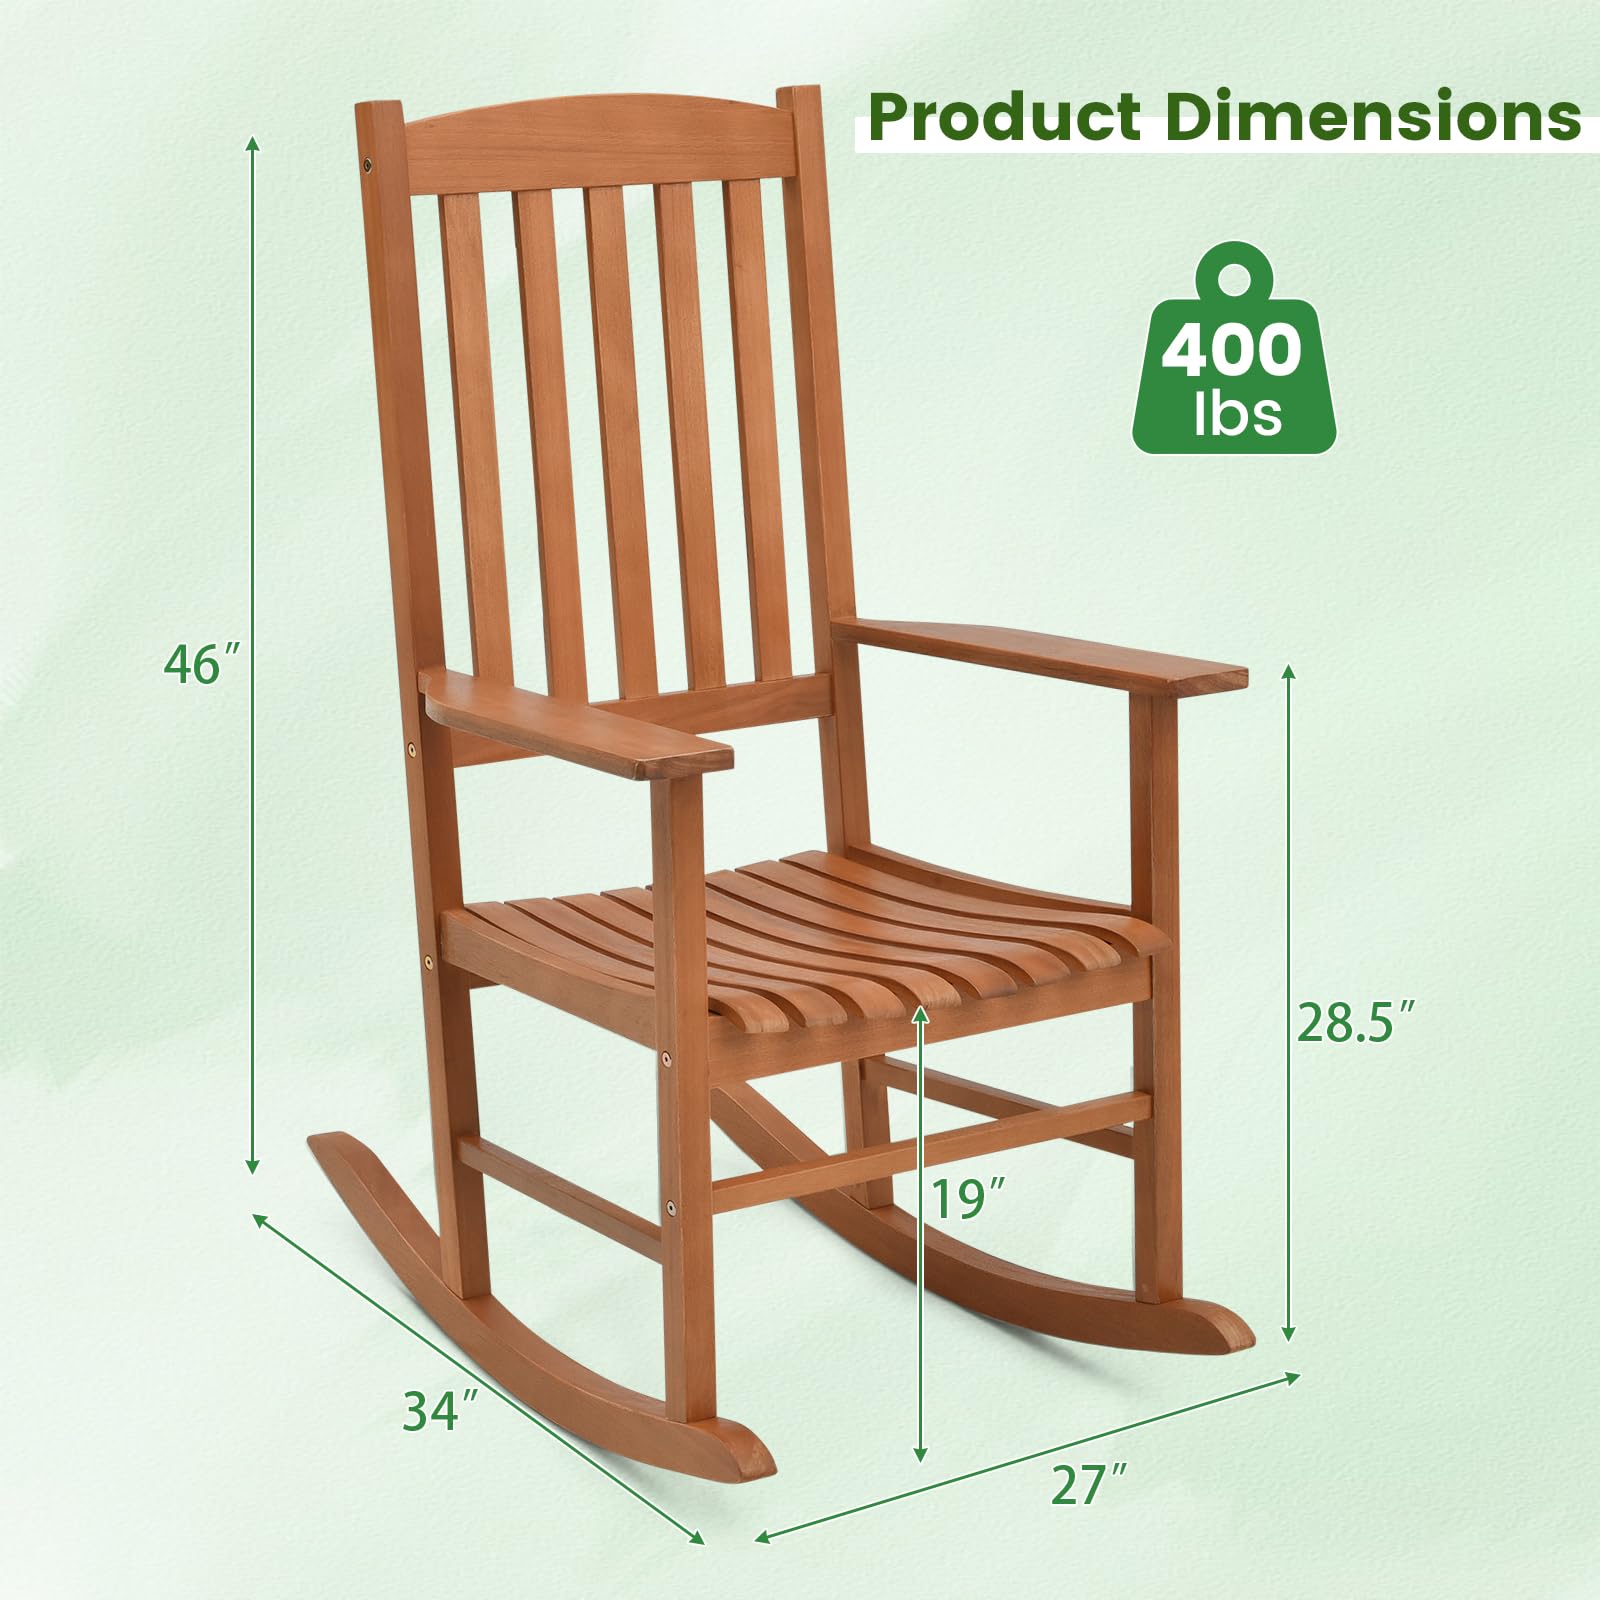 Giantex Wood Outdoor Rocking Chair - Eucalyptus Rocker Chair with Stable & Safe Rocking Base